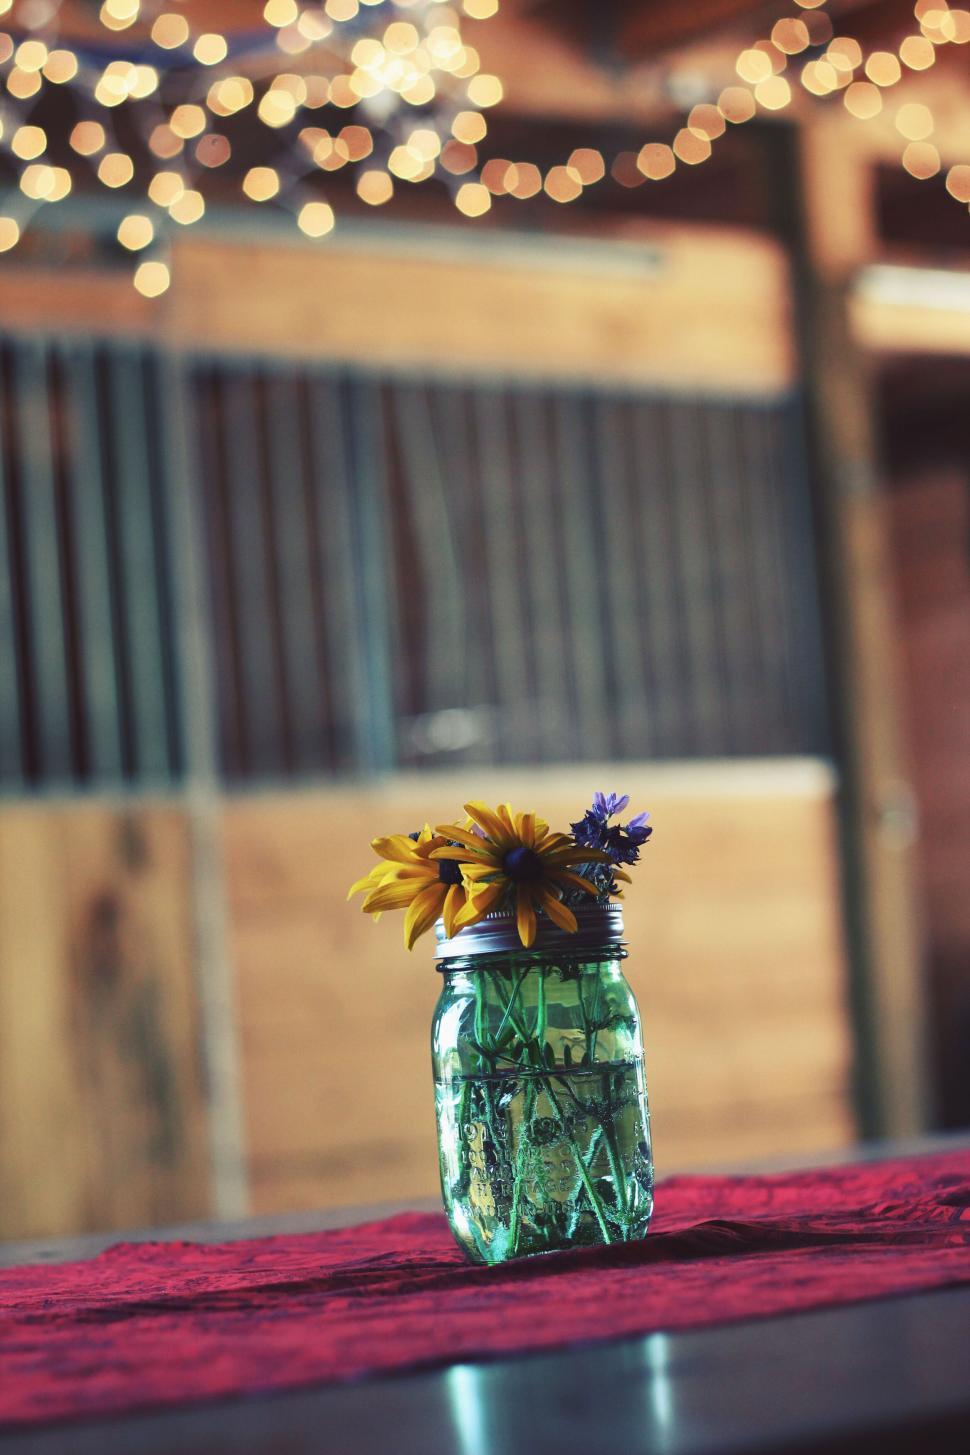 Free Image of A glass jar with flowers in it 